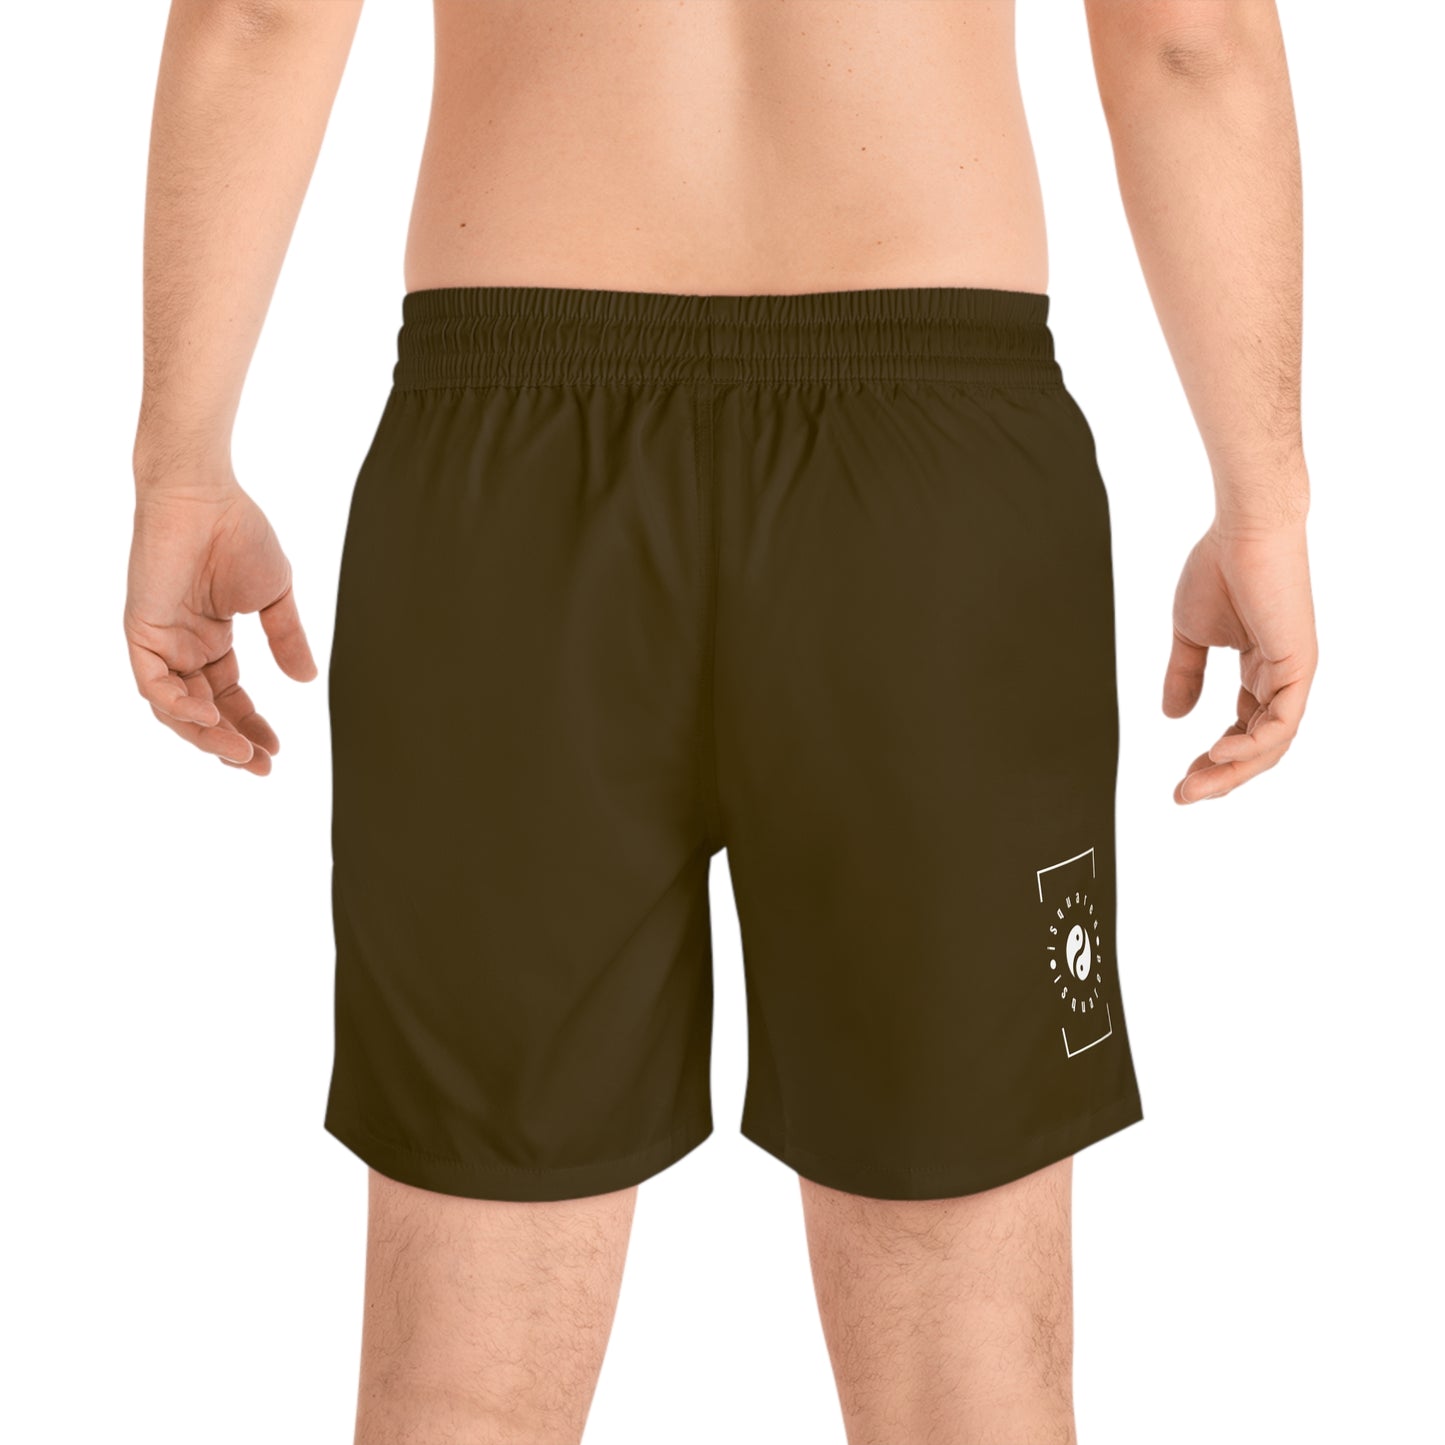 Earthy Brown - Swim Shorts (Solid Color) for Men